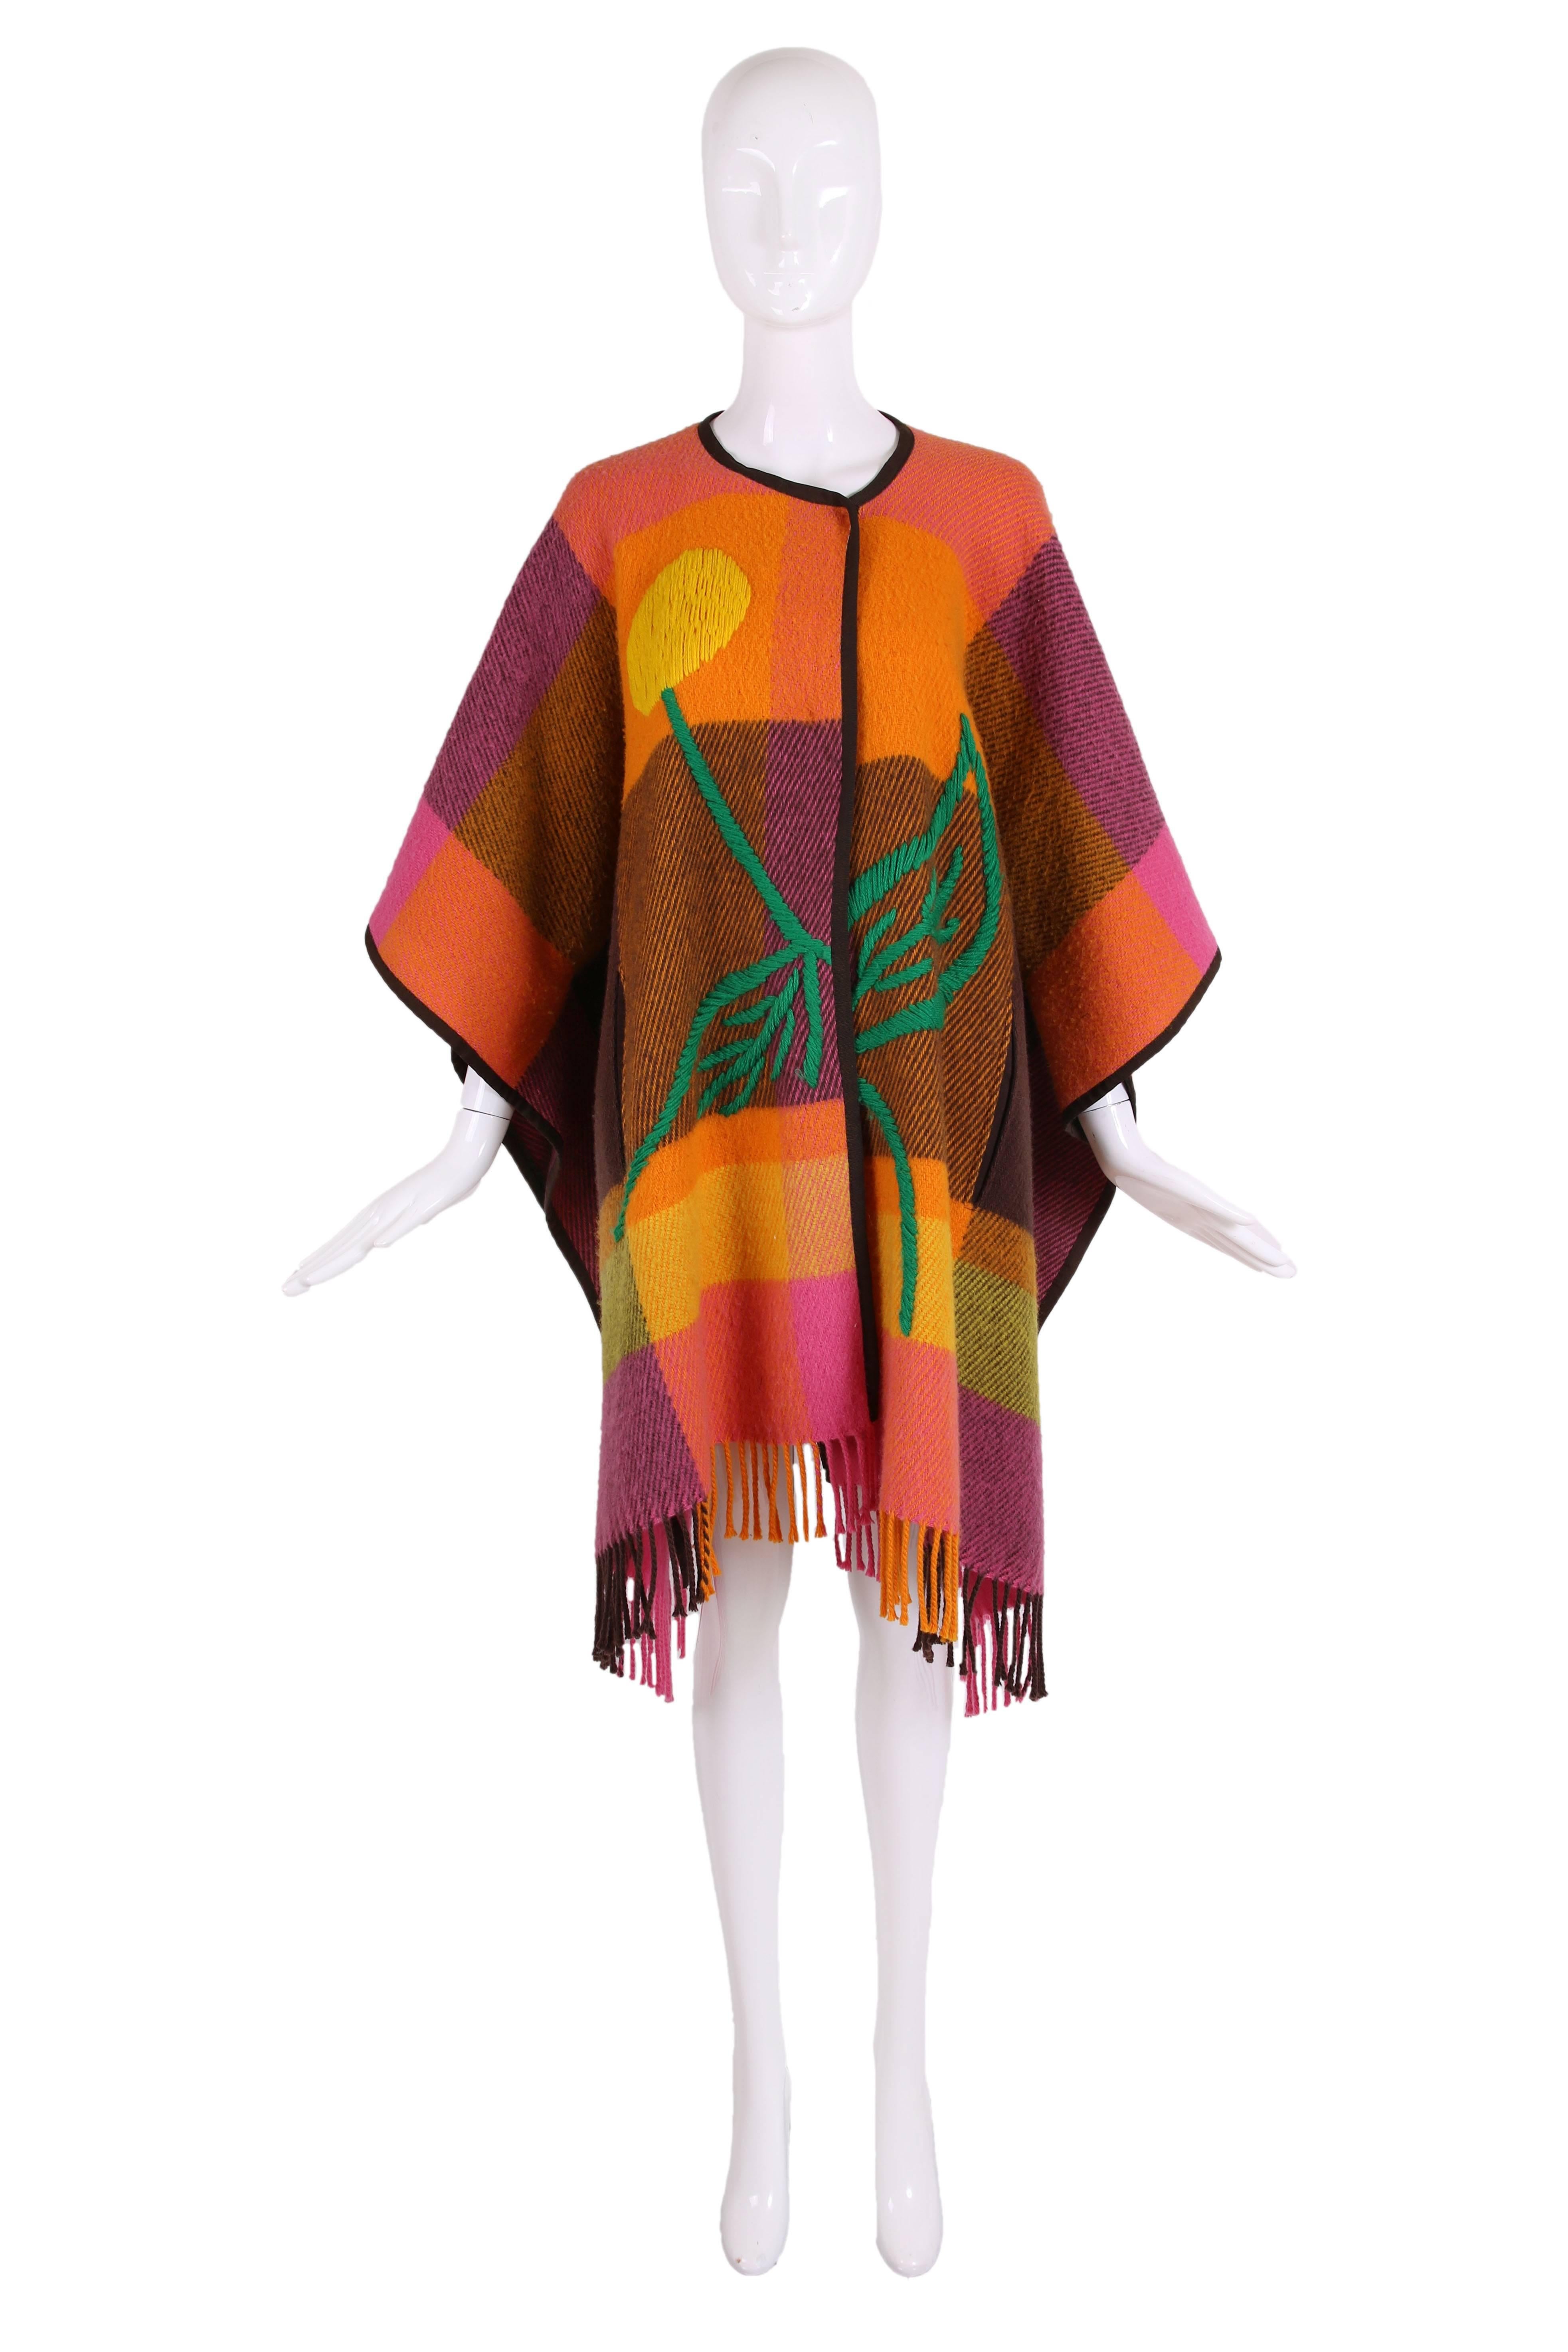 JC de Castlbajac pink, yellow, orange, green and brown plaid melton wool poncho w/embroidered flower across center front and brown grosgrain trim. Poncho has interior snap closure and button closure, hidden pockets and fringe trim at hem. In